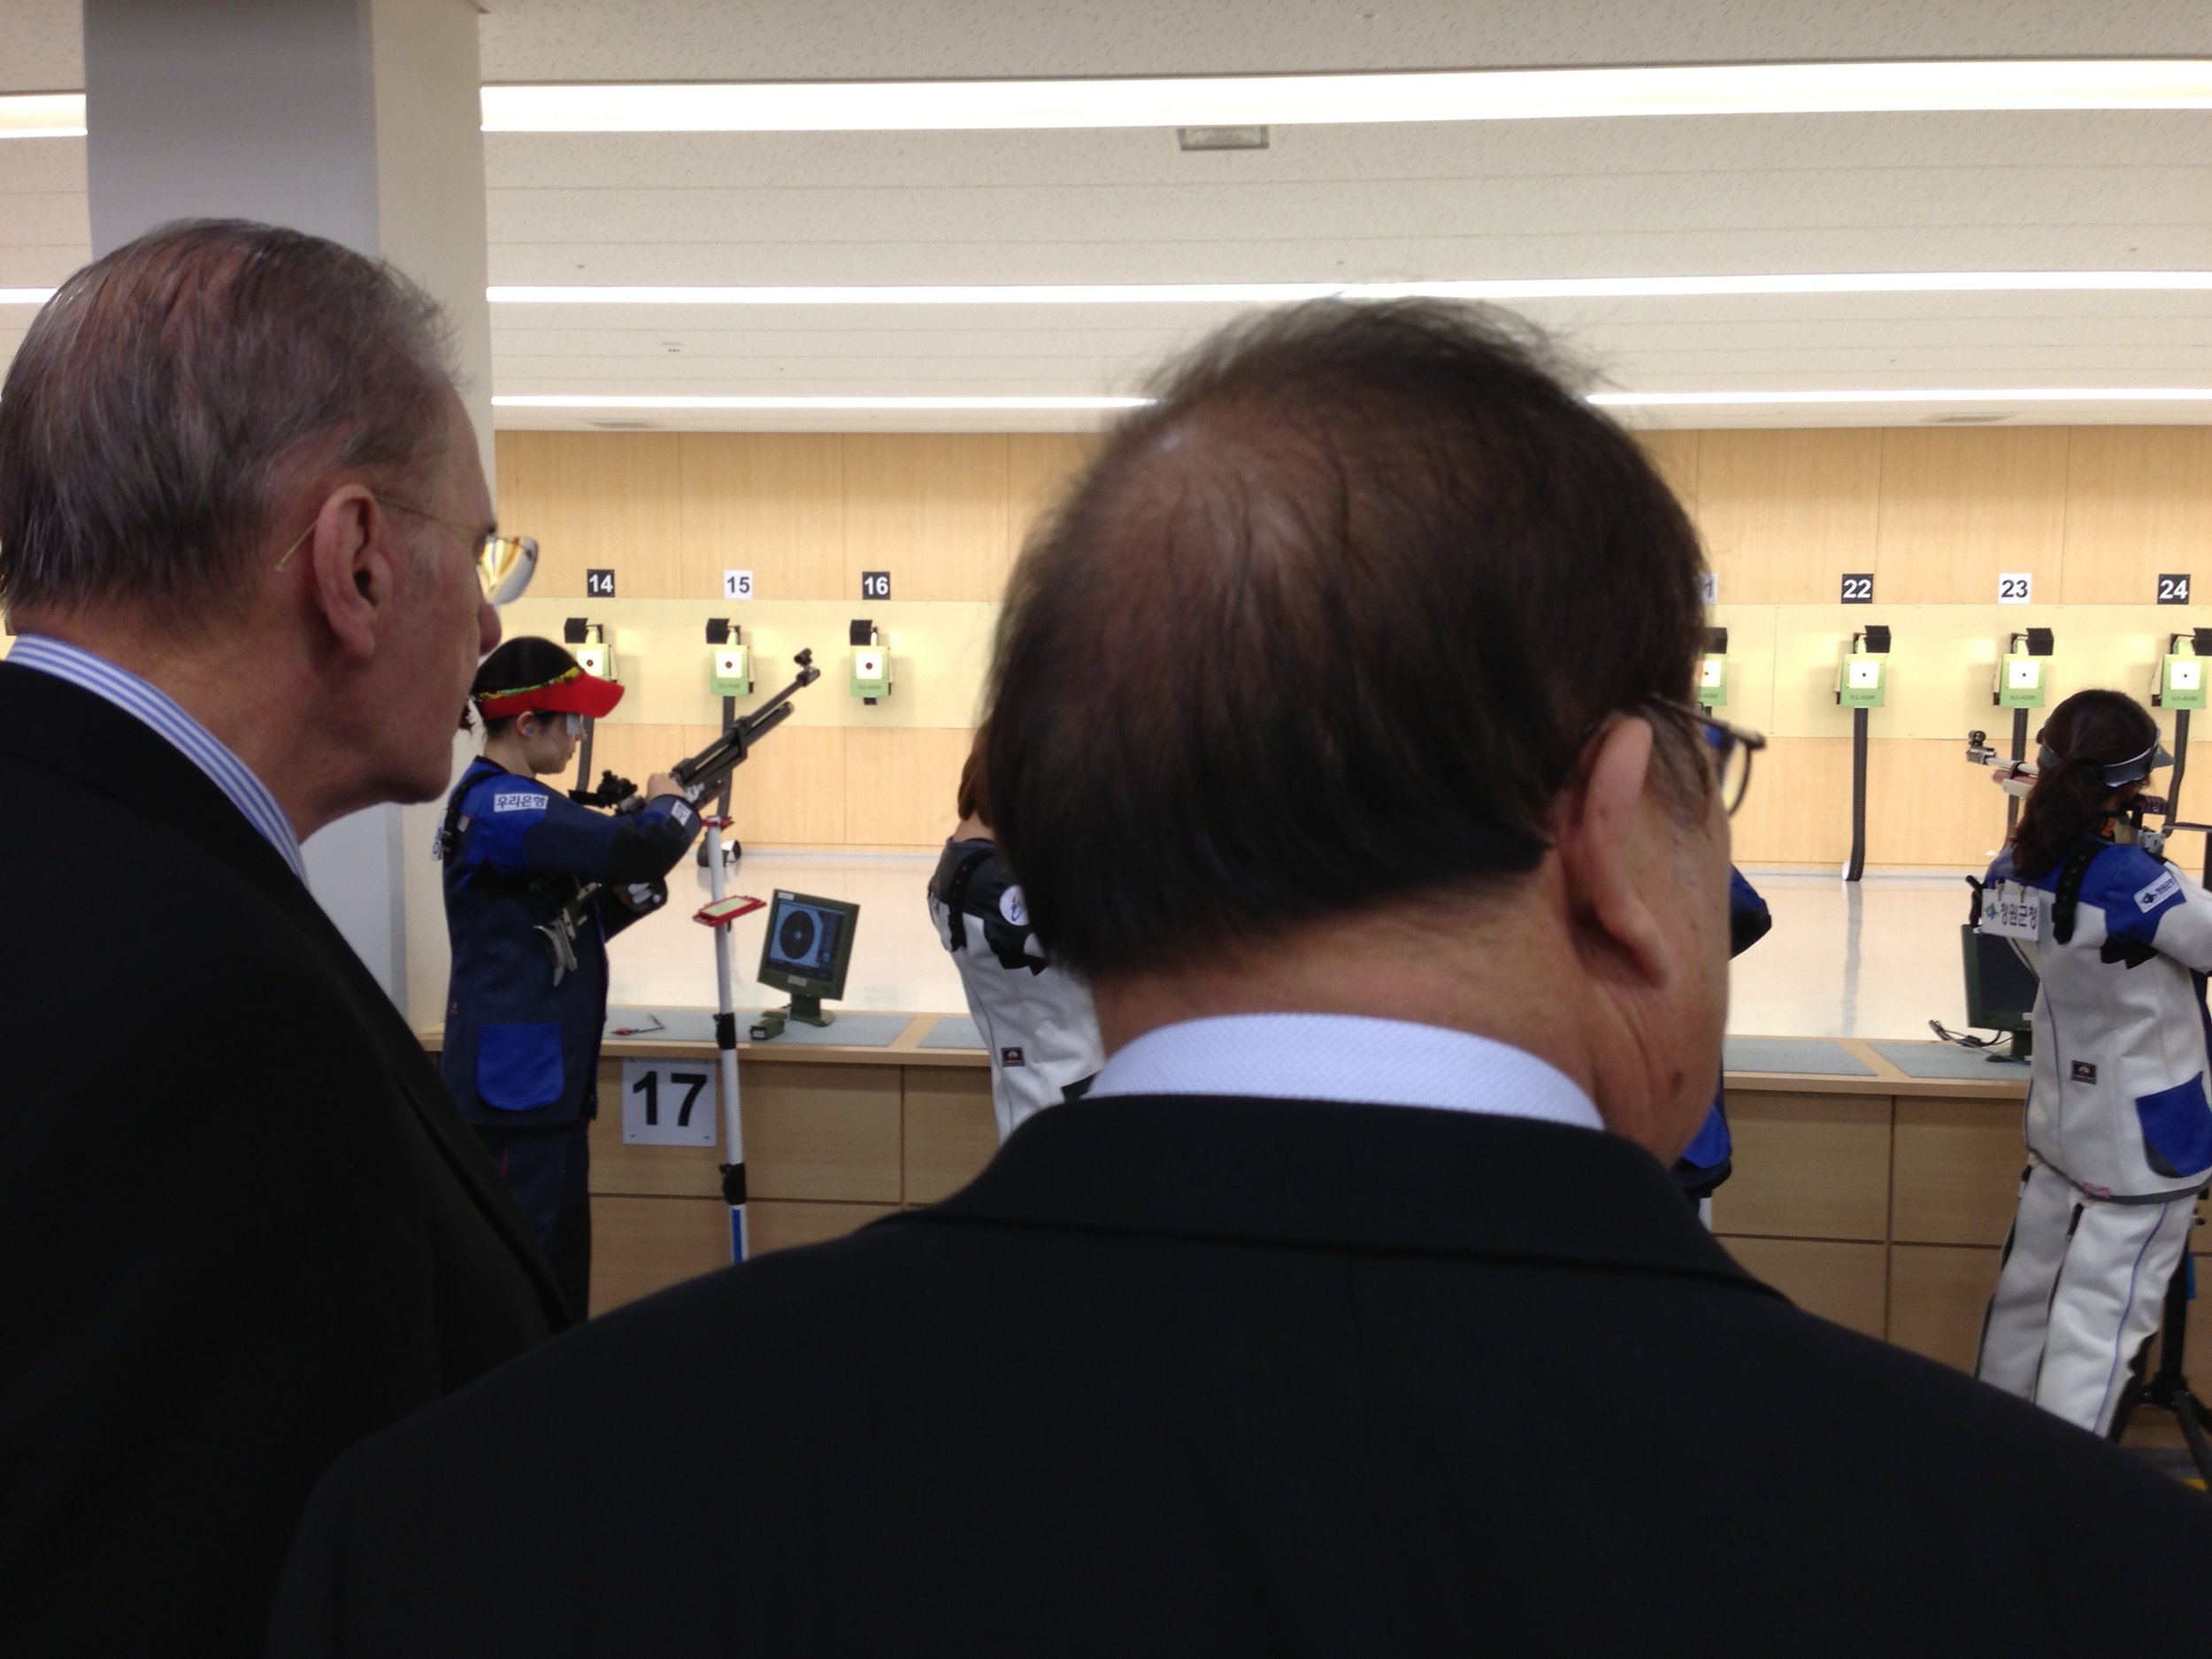 Jacques Rogge, the IOC president, left, watches Korean shooters practice at the Jincheon National Training Center